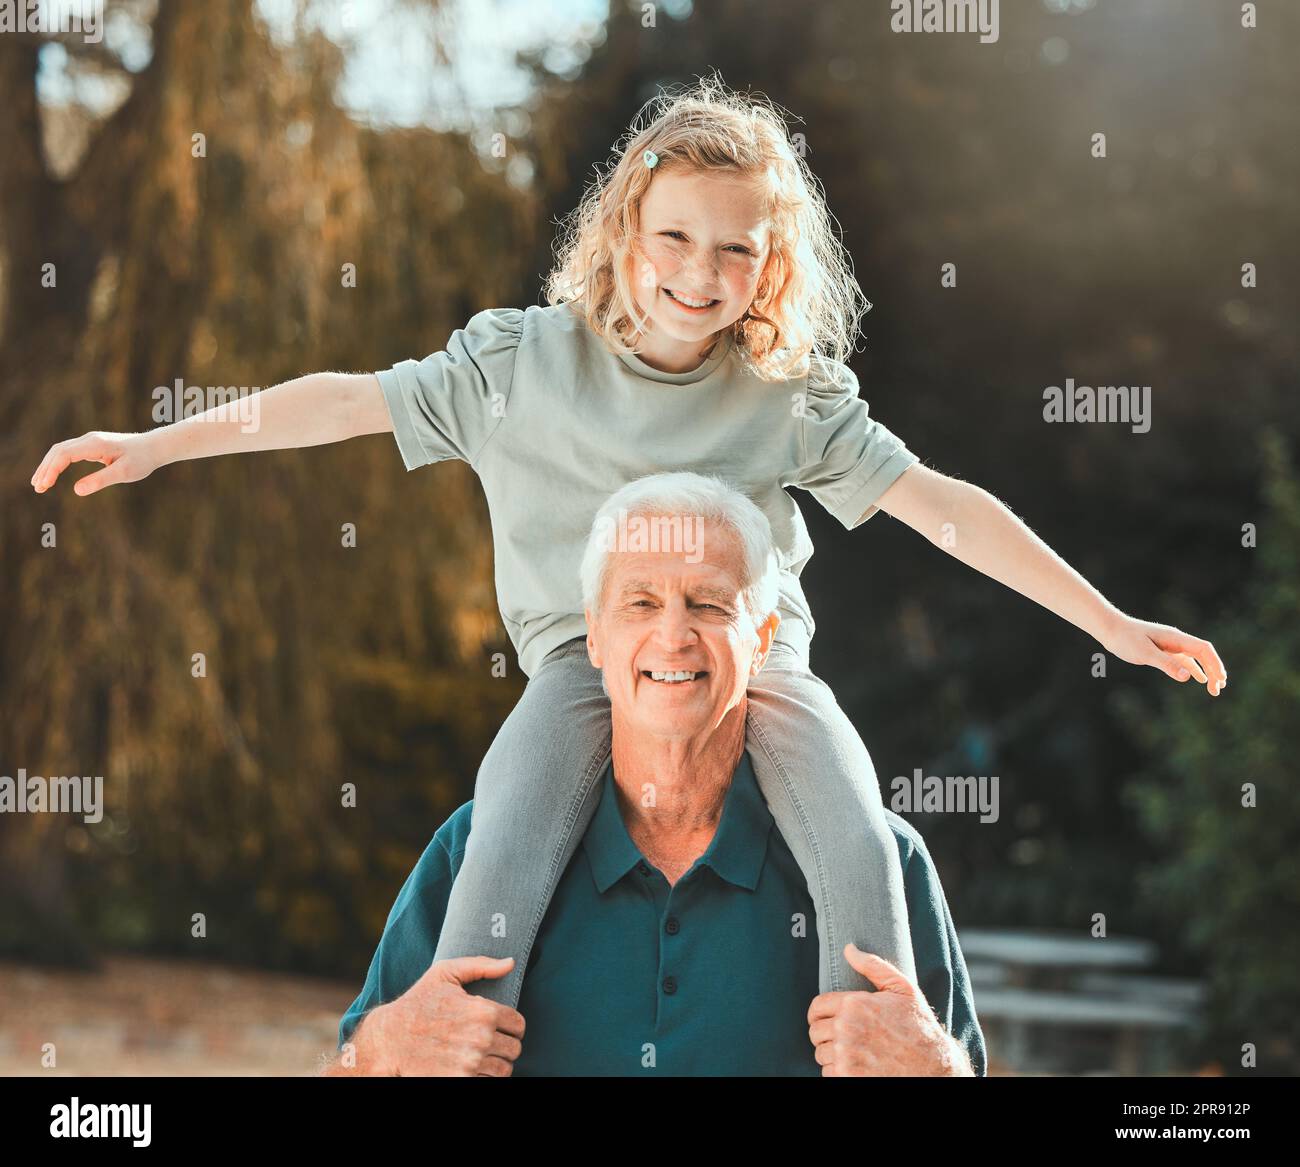 You are altogether beautiful my darling. a girl being carried by her grandfather outside. Stock Photo